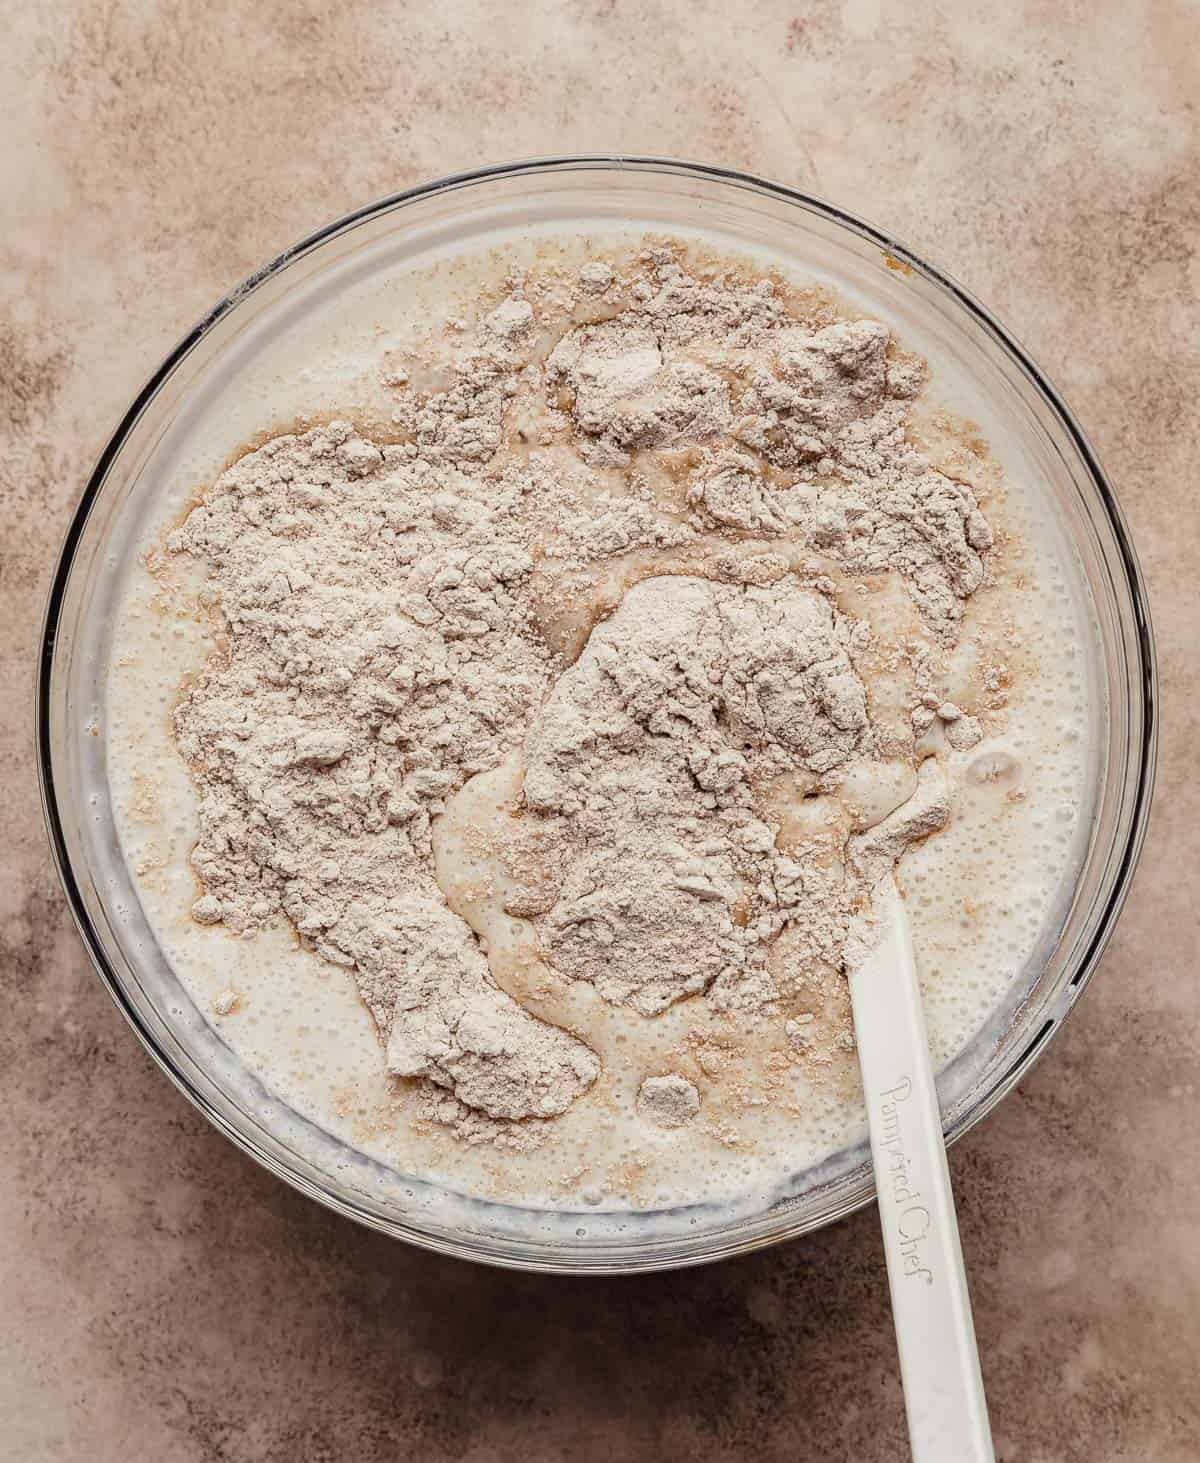 Whole wheat flour in a glass bowl on a light brown textured background.